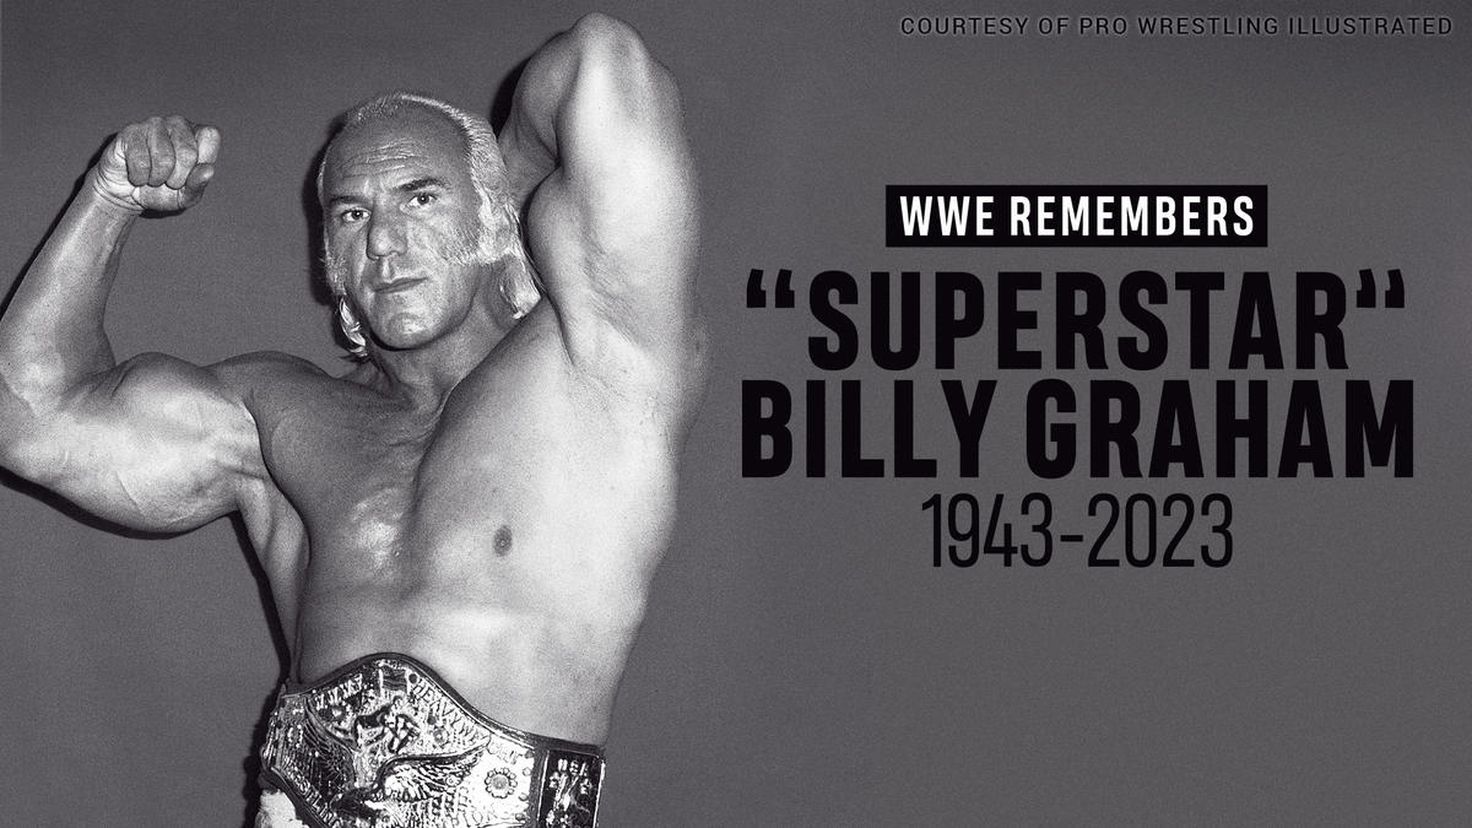 Mourning in WWE: Billy Graham dies at 79
